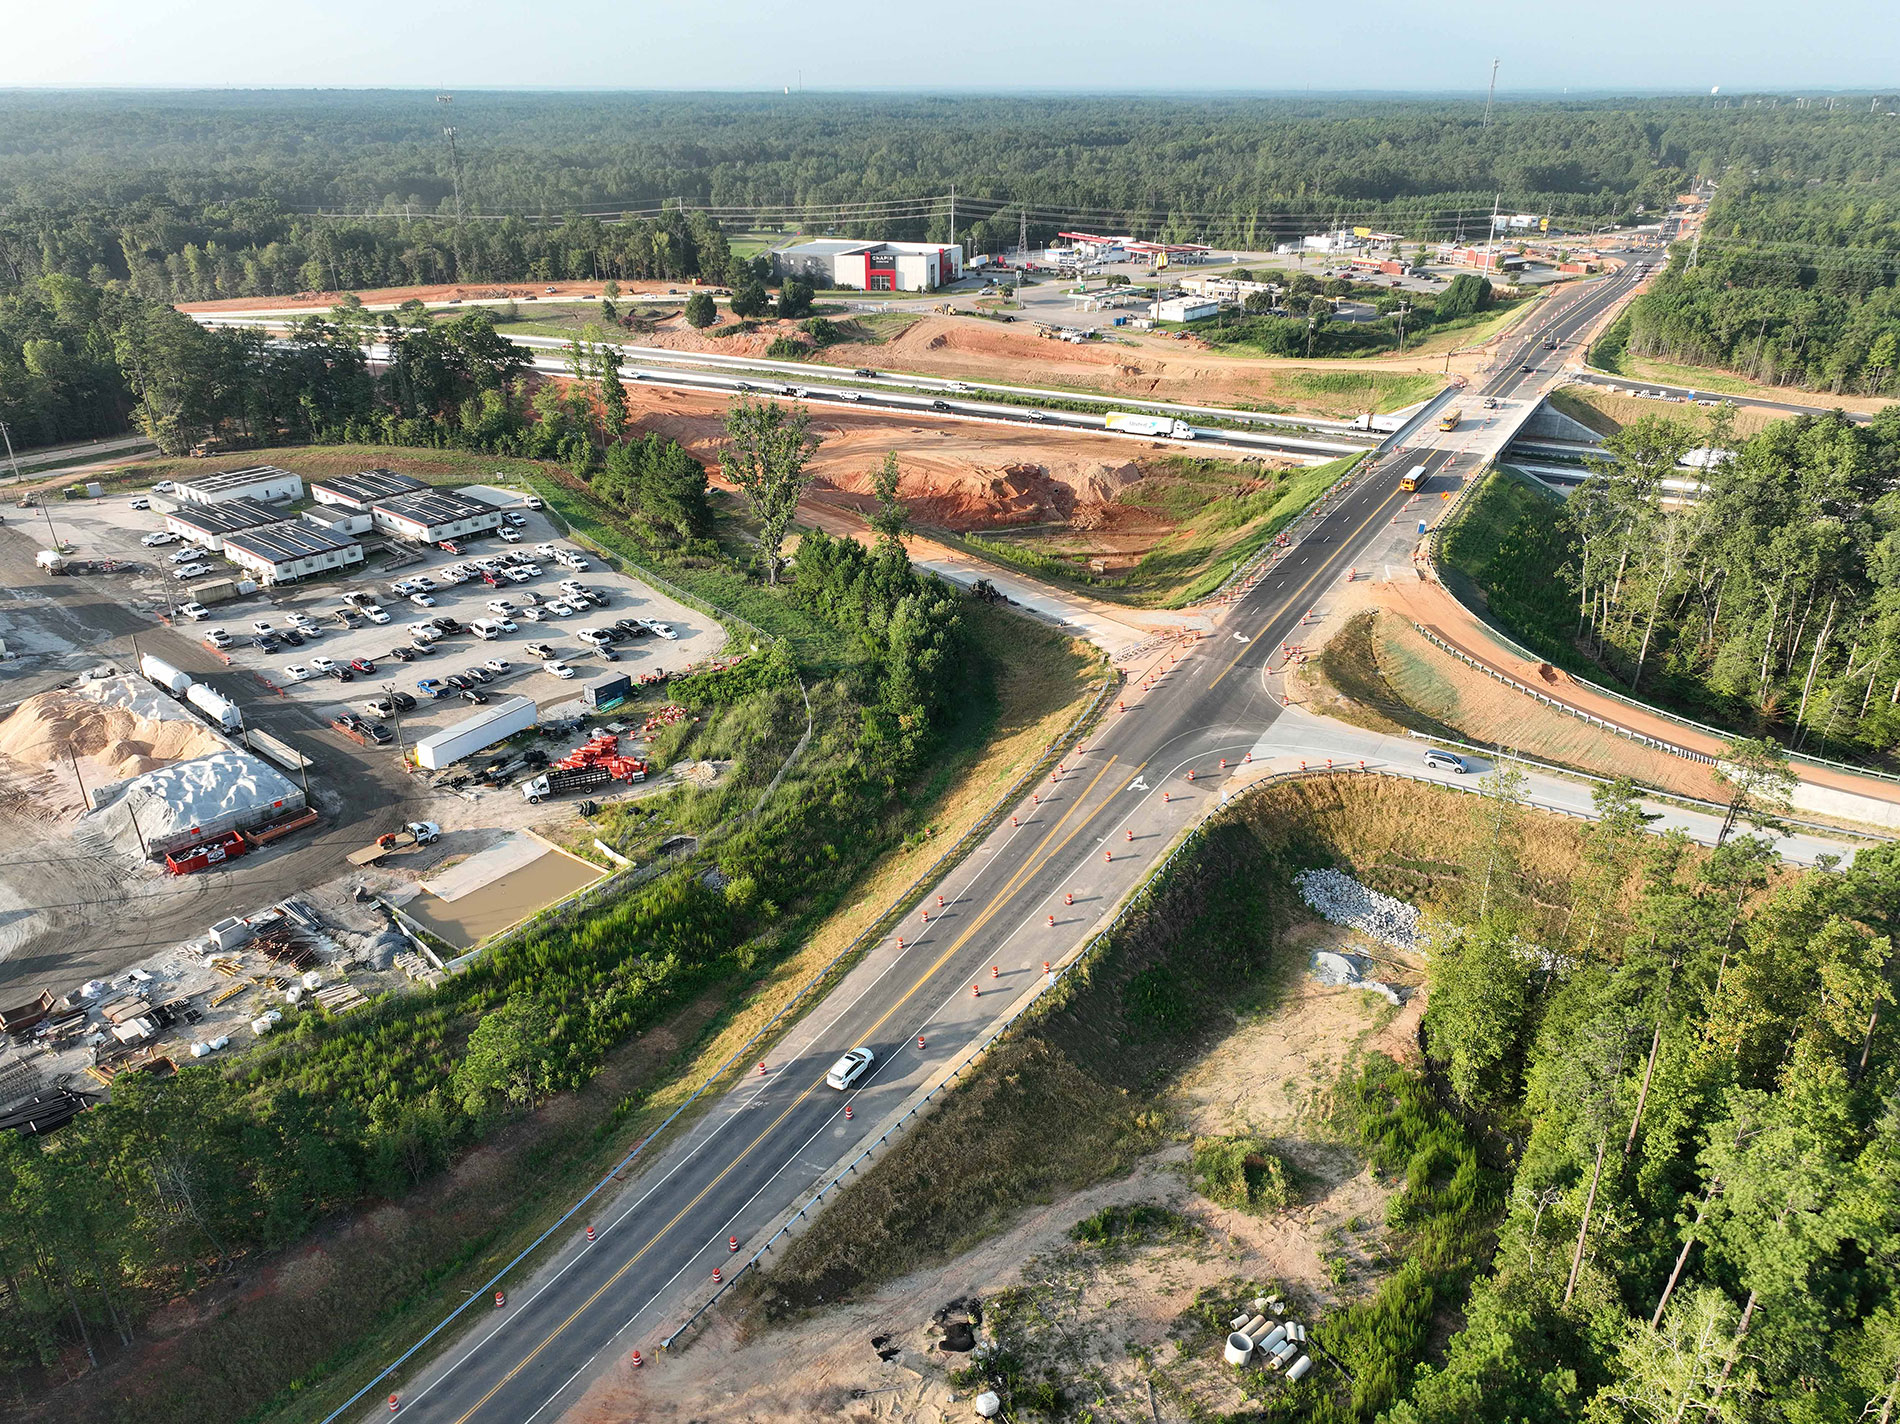 This photo shows the recently opened new location of Columbia Ave at Exit 91.  Crews are working to tie in the new ramps to connect to I-26.